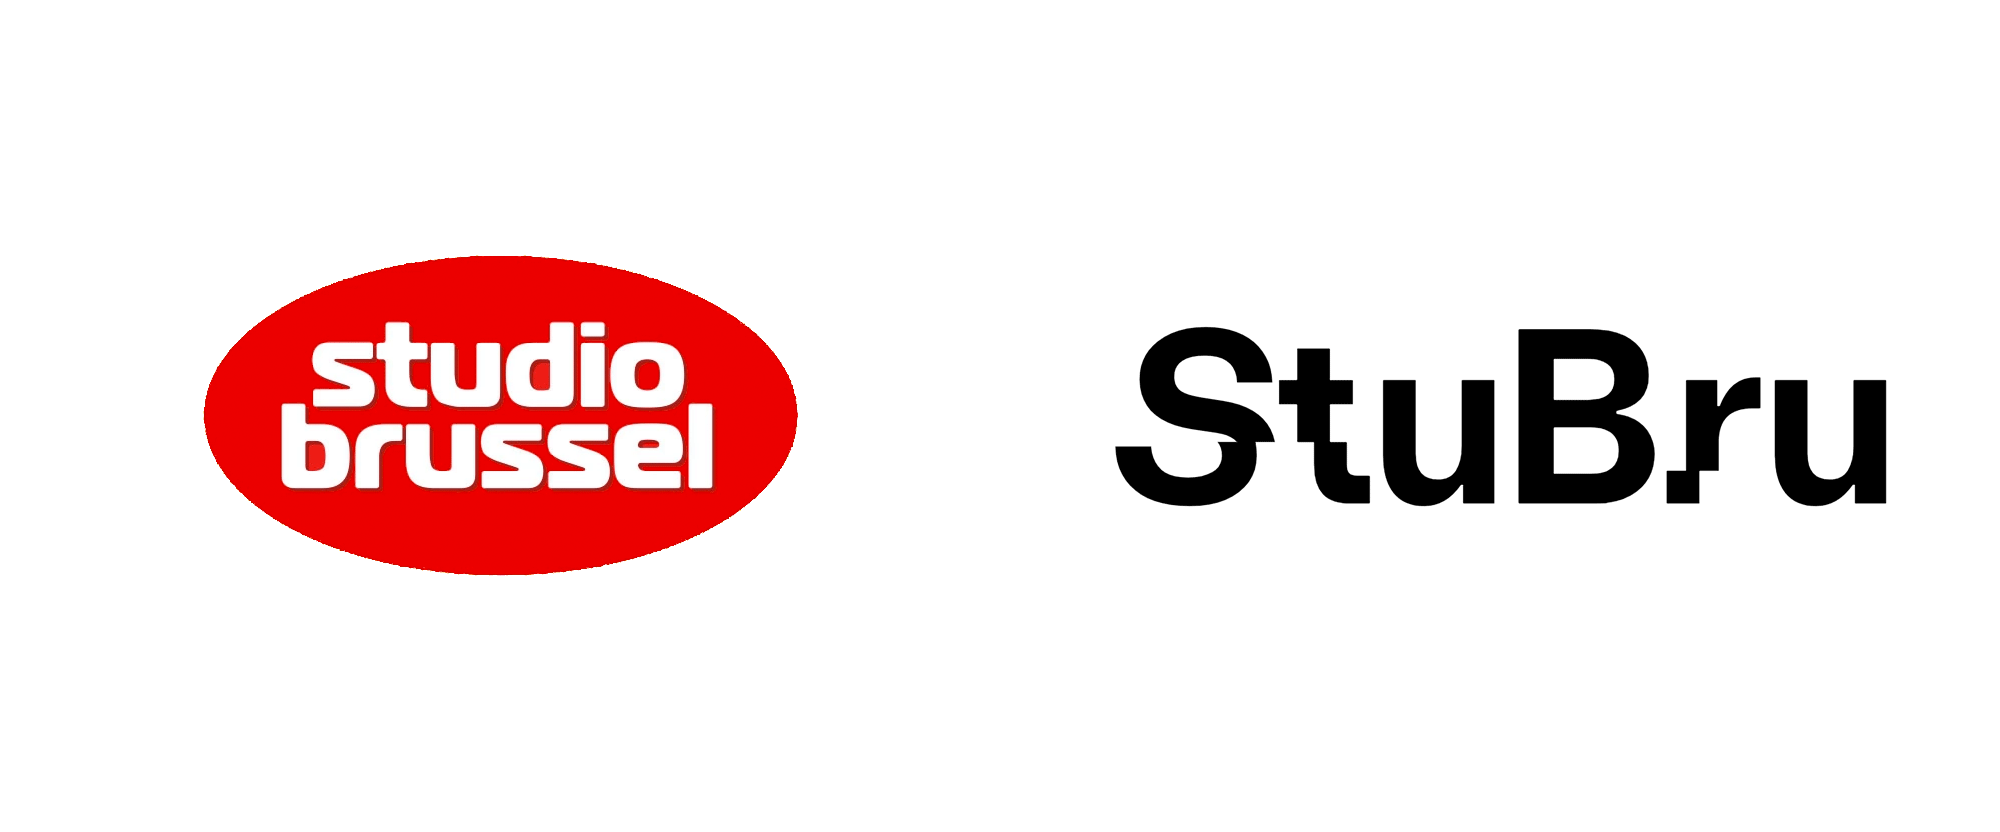 New Logo for Studio Brussels by Base